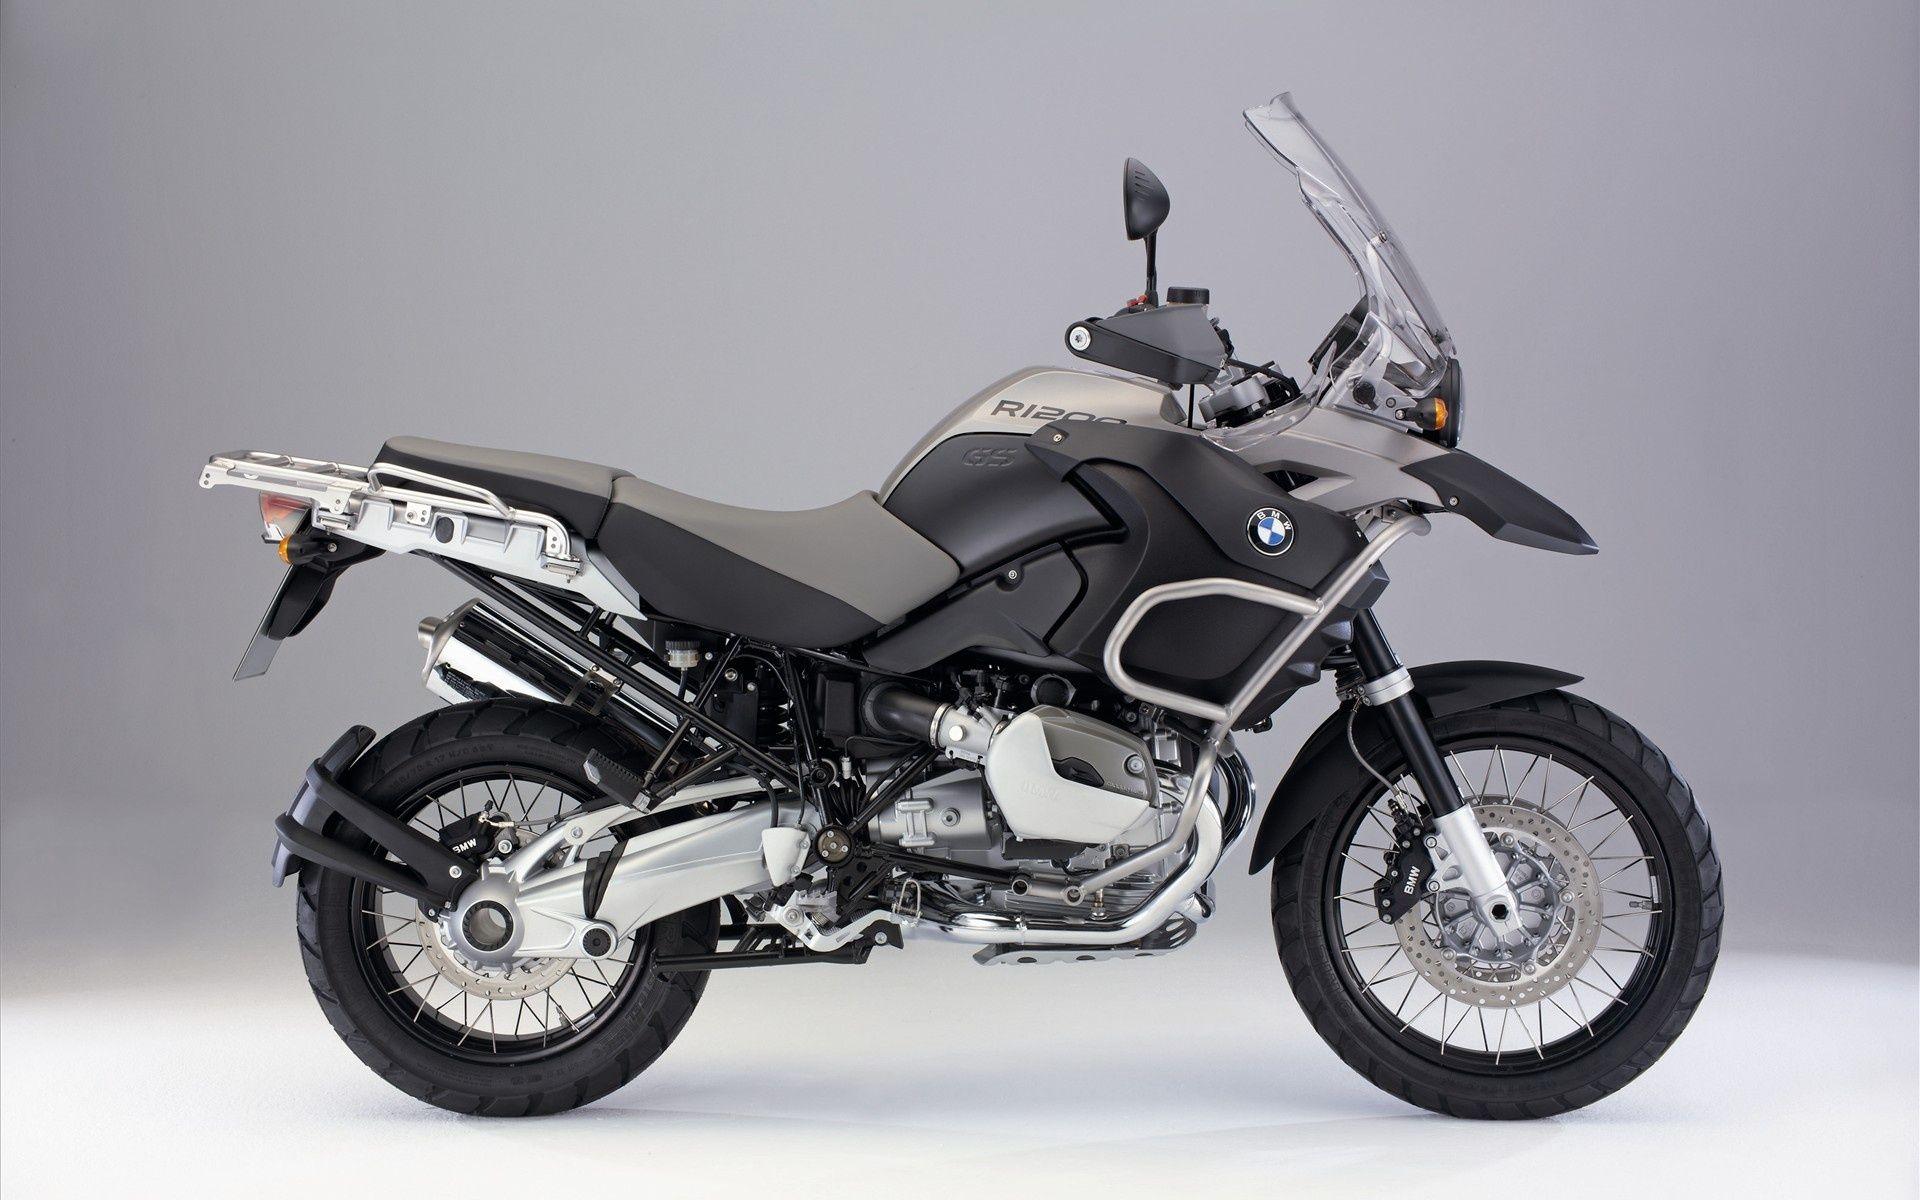 BMW R 1200 GS Wallpaper in jpg format for free download